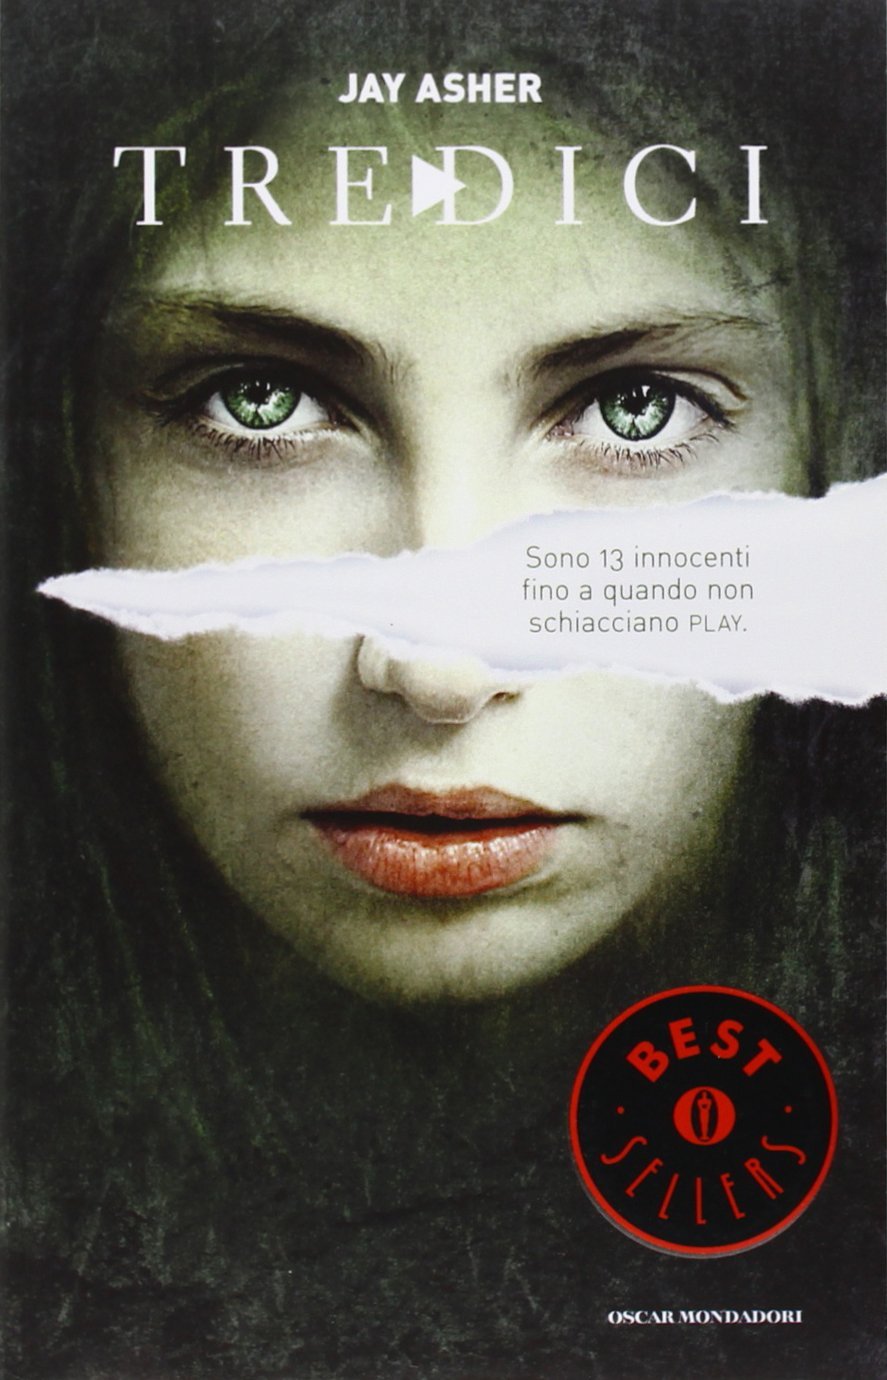 Many Covers Monday 13 Reasons Why By Jay Asher